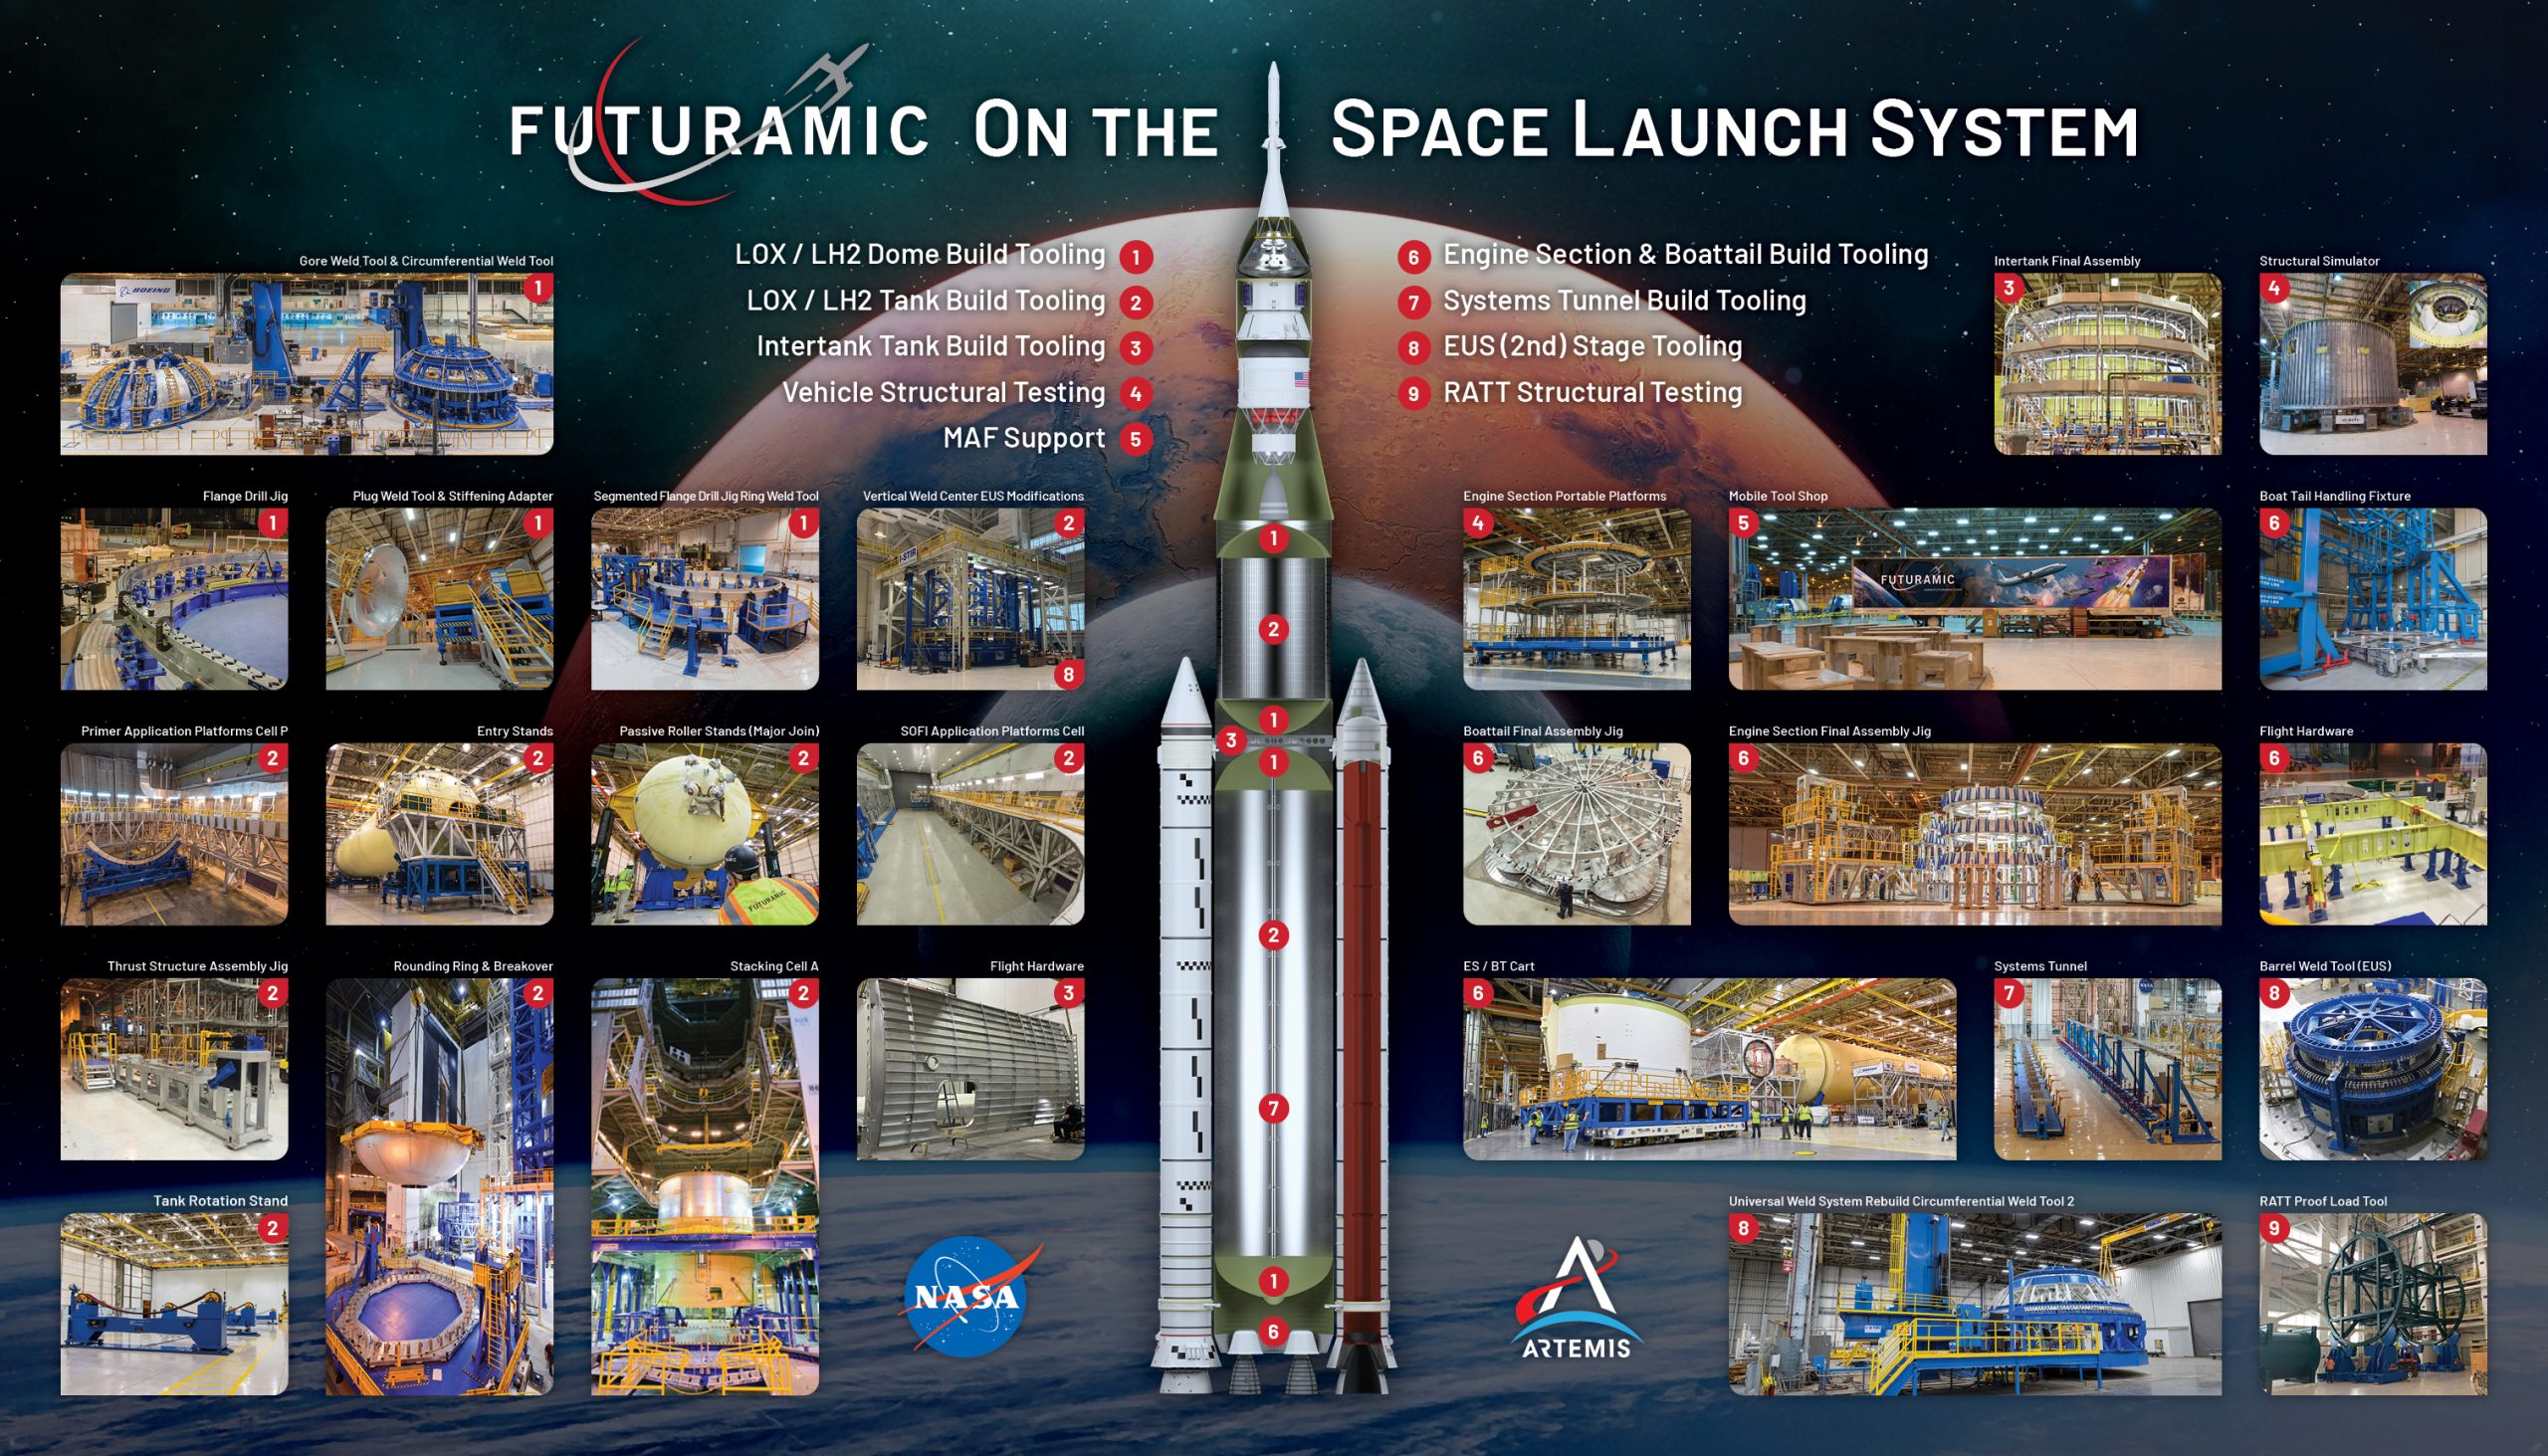 Futuramic Info-Graphic Showing It's Tooling and Flight Hardware for the World’s Most Powerful Deep Space Exploration Rocke